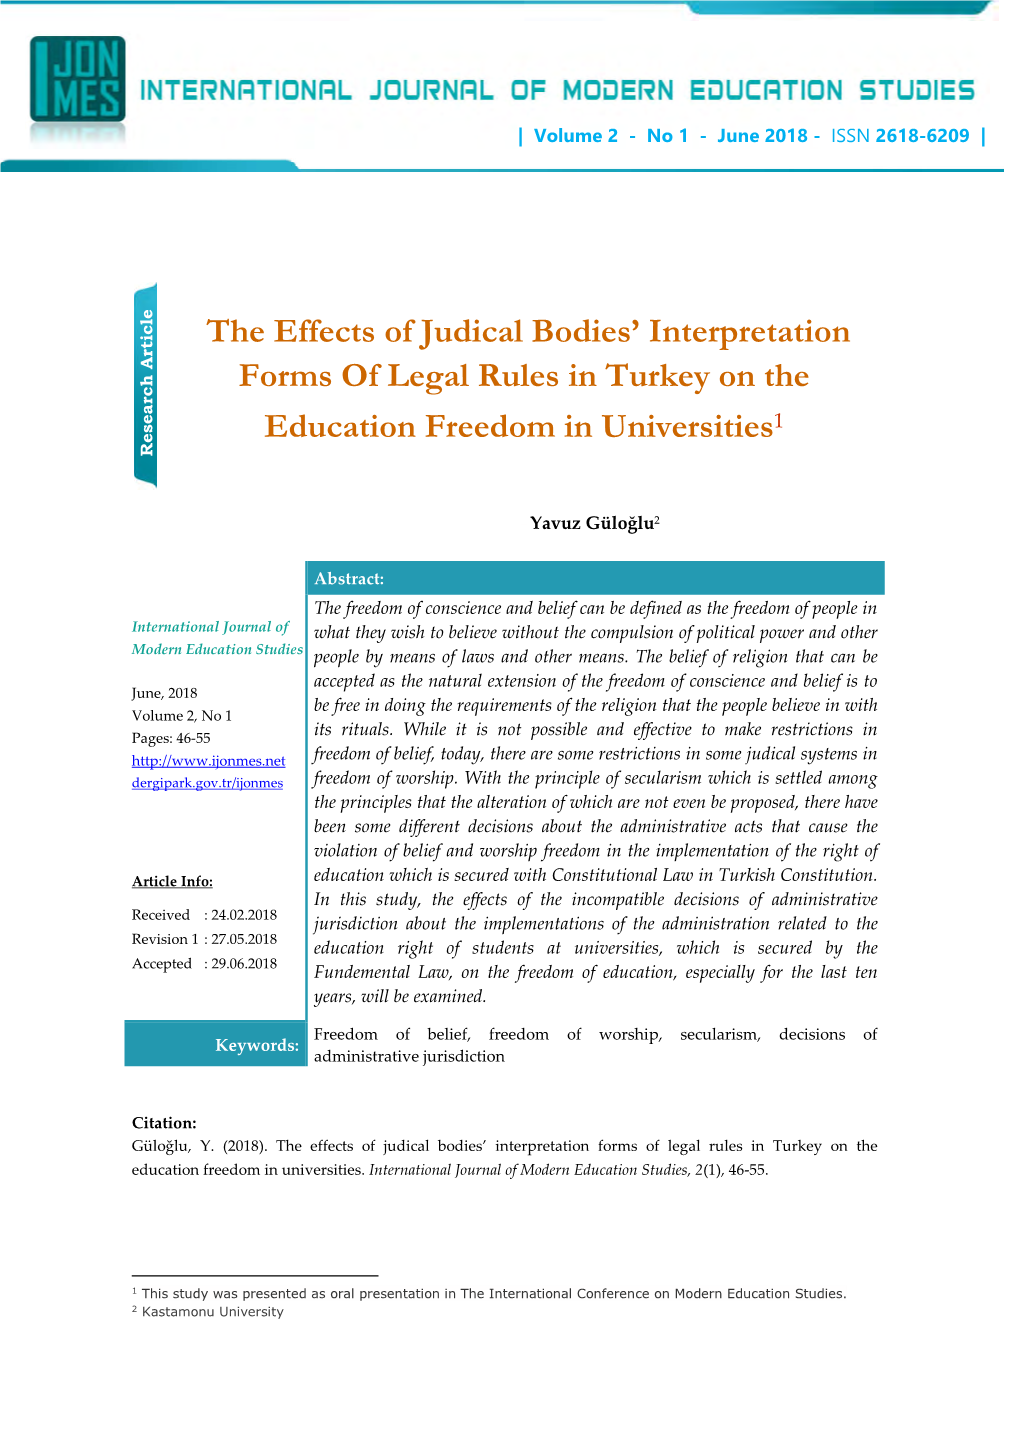 The Effects of Judical Bodies' Interpretation Forms of Legal Rules